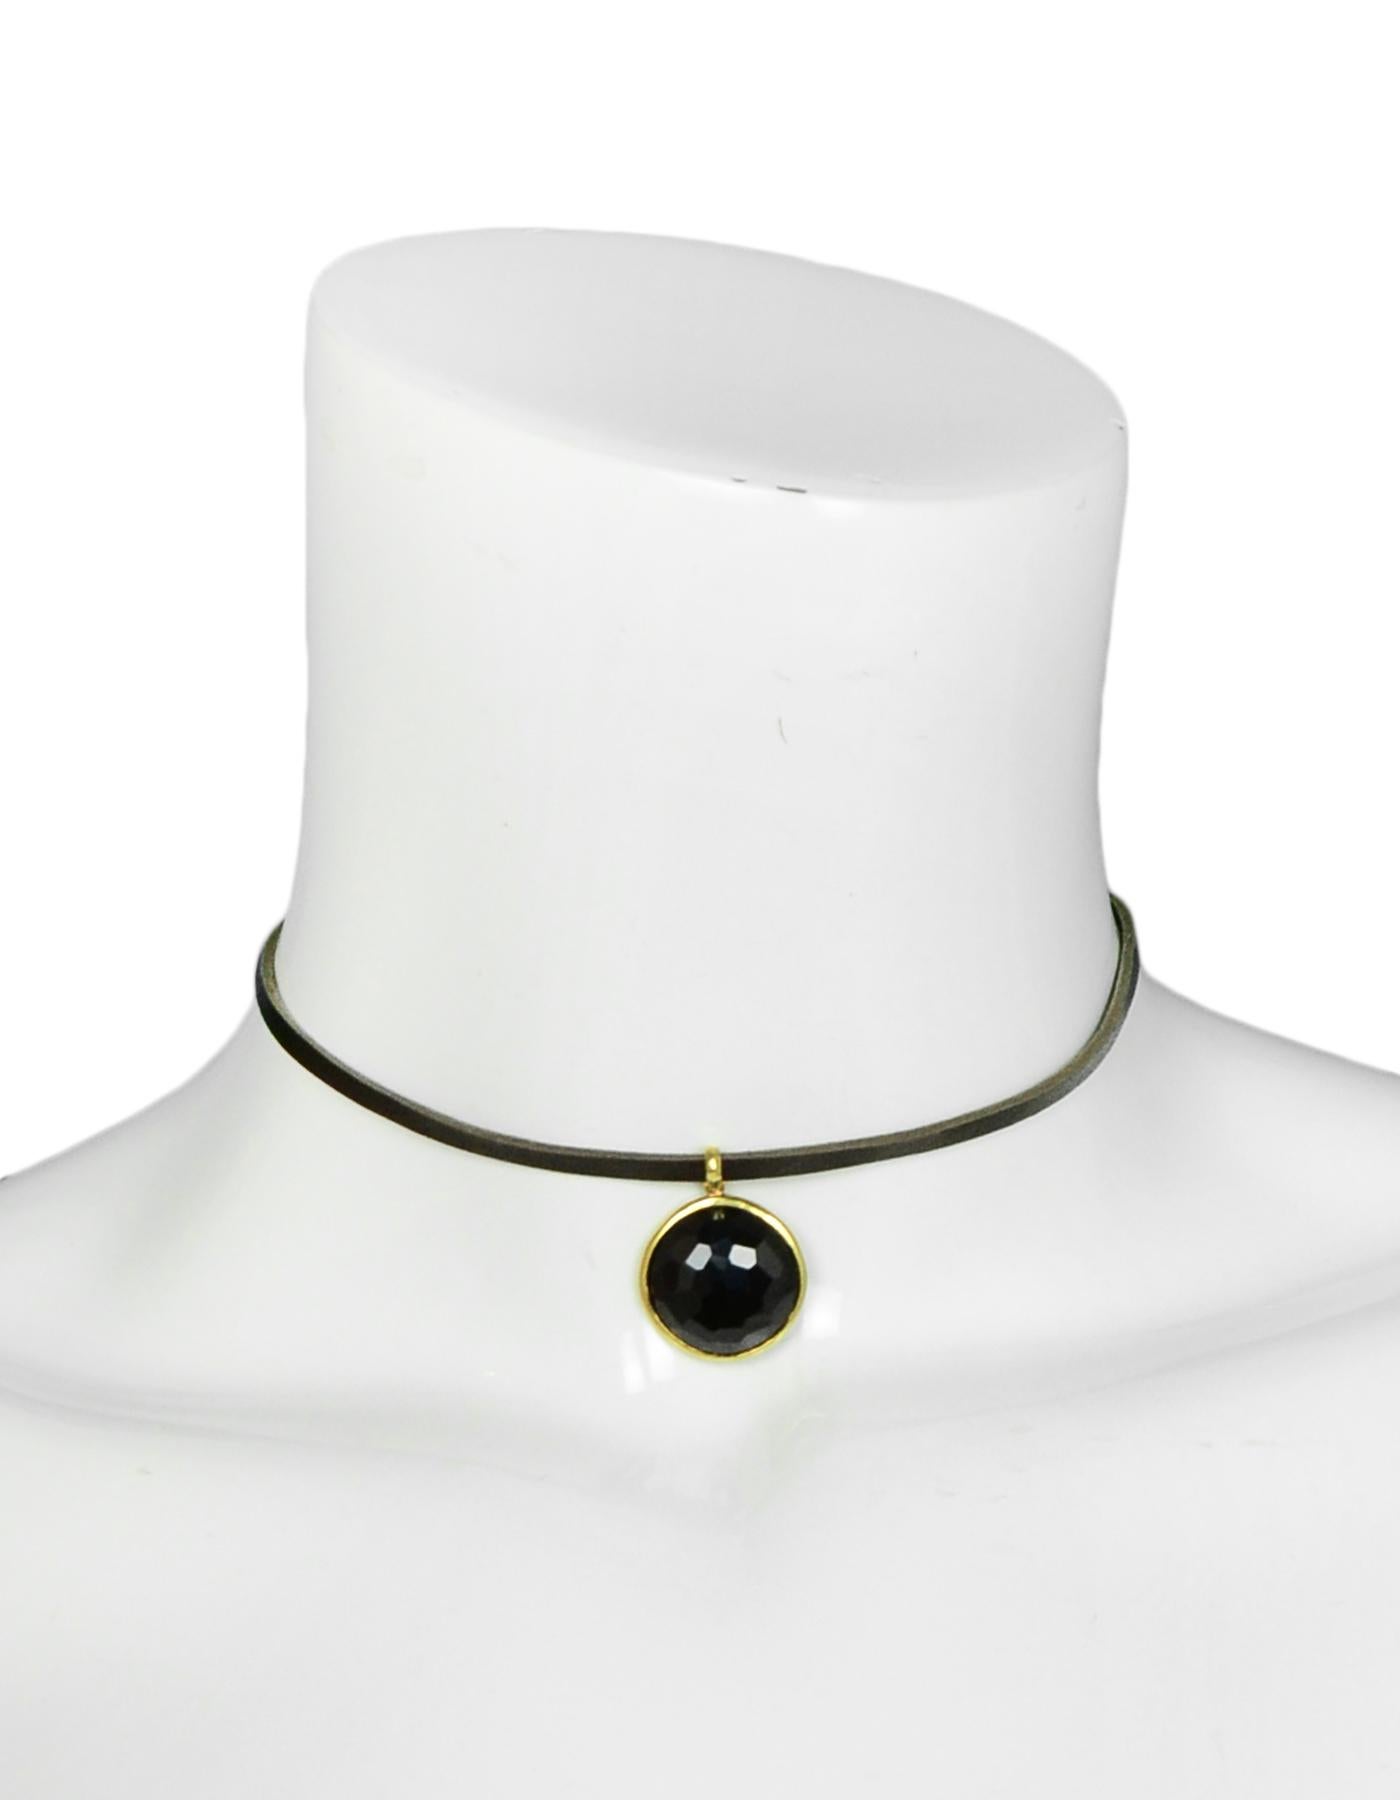 Ippolita Black Onyx Charm Bezel set in 18K Gold
**LEATHER CORD NOT INCLUDED**
Color: Black
Materials: Onyx, 18k Gold
Hallmarks: 